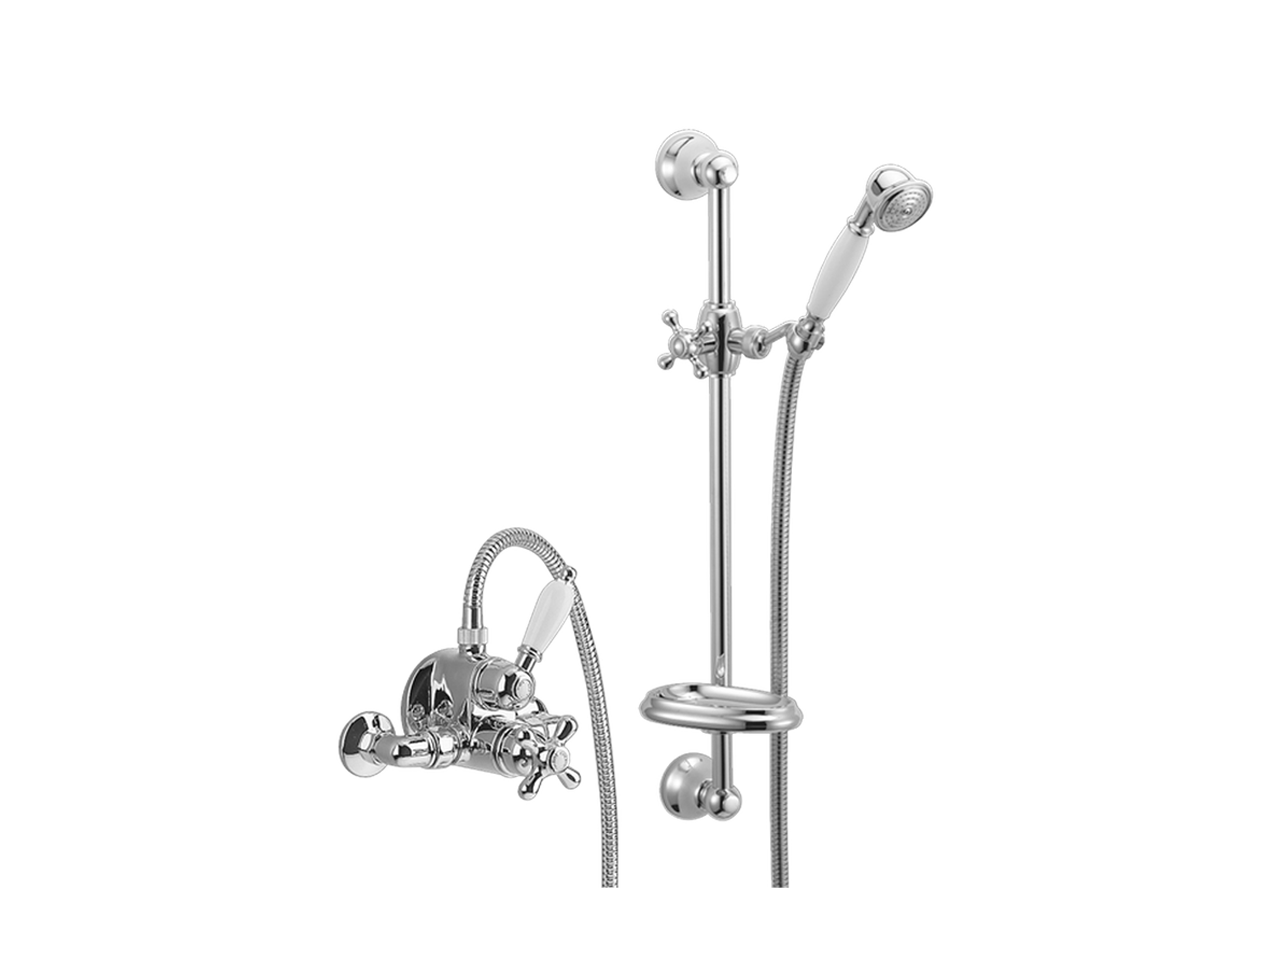 HUBERThermostatic shower mixer with sliding bar CROISETTE